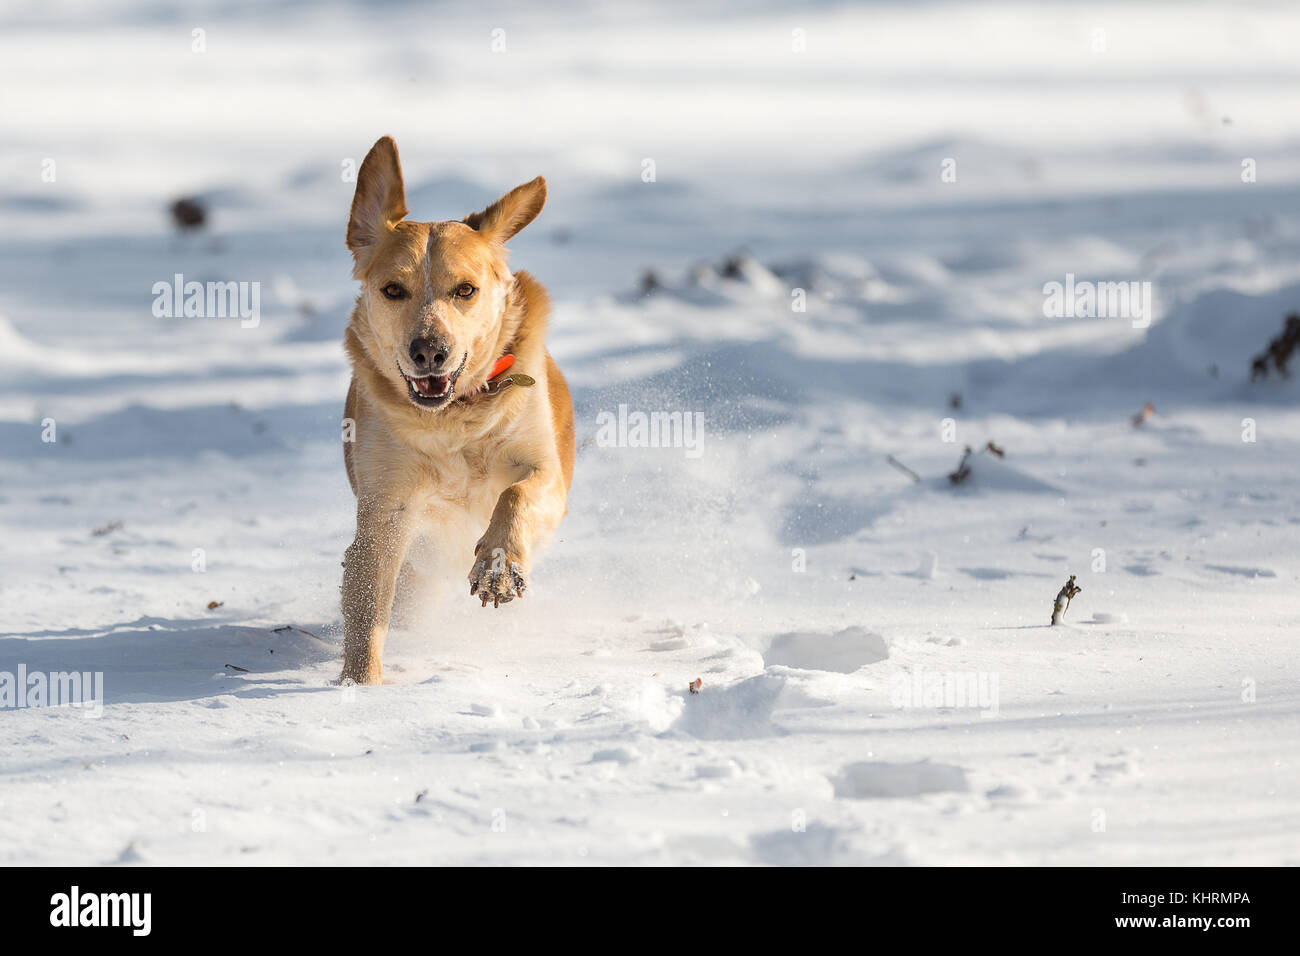 A Light Brown Labrador running towards the photographer in the snow. Stock Photo